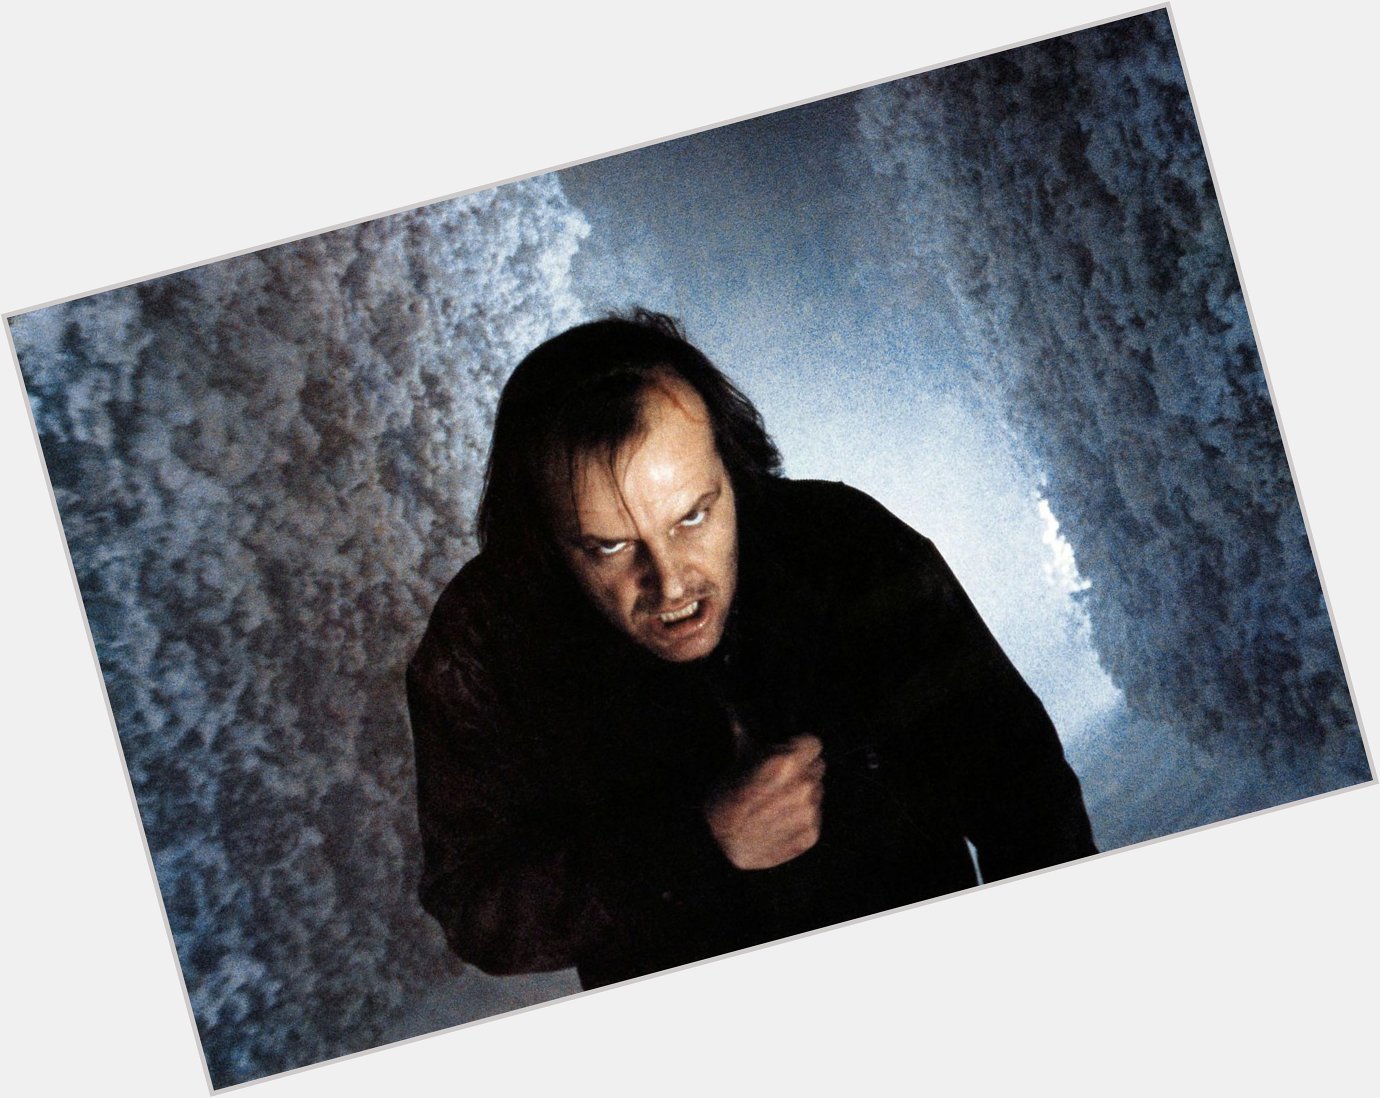 Happy birthday to Jack Nicholson! What is your favorite scene from THE SHINING? 